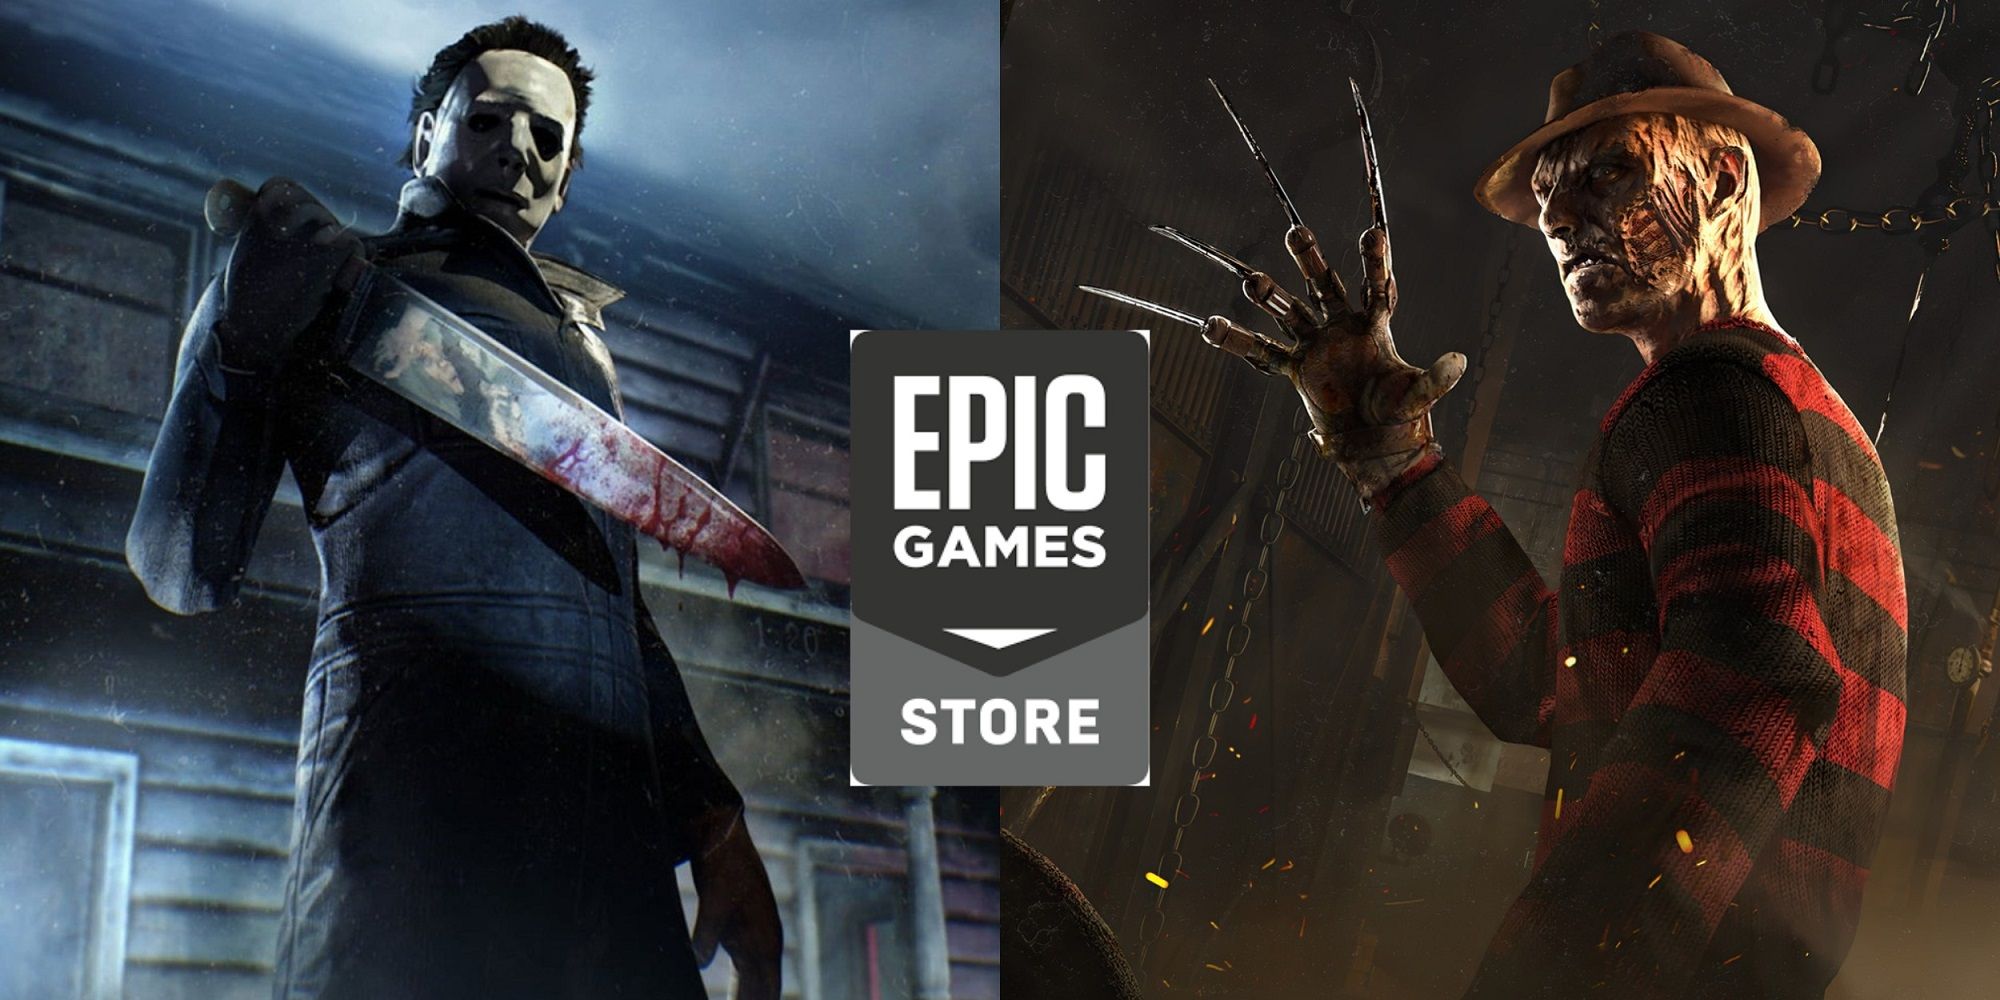 Dead by Daylight free on Epic Games Store